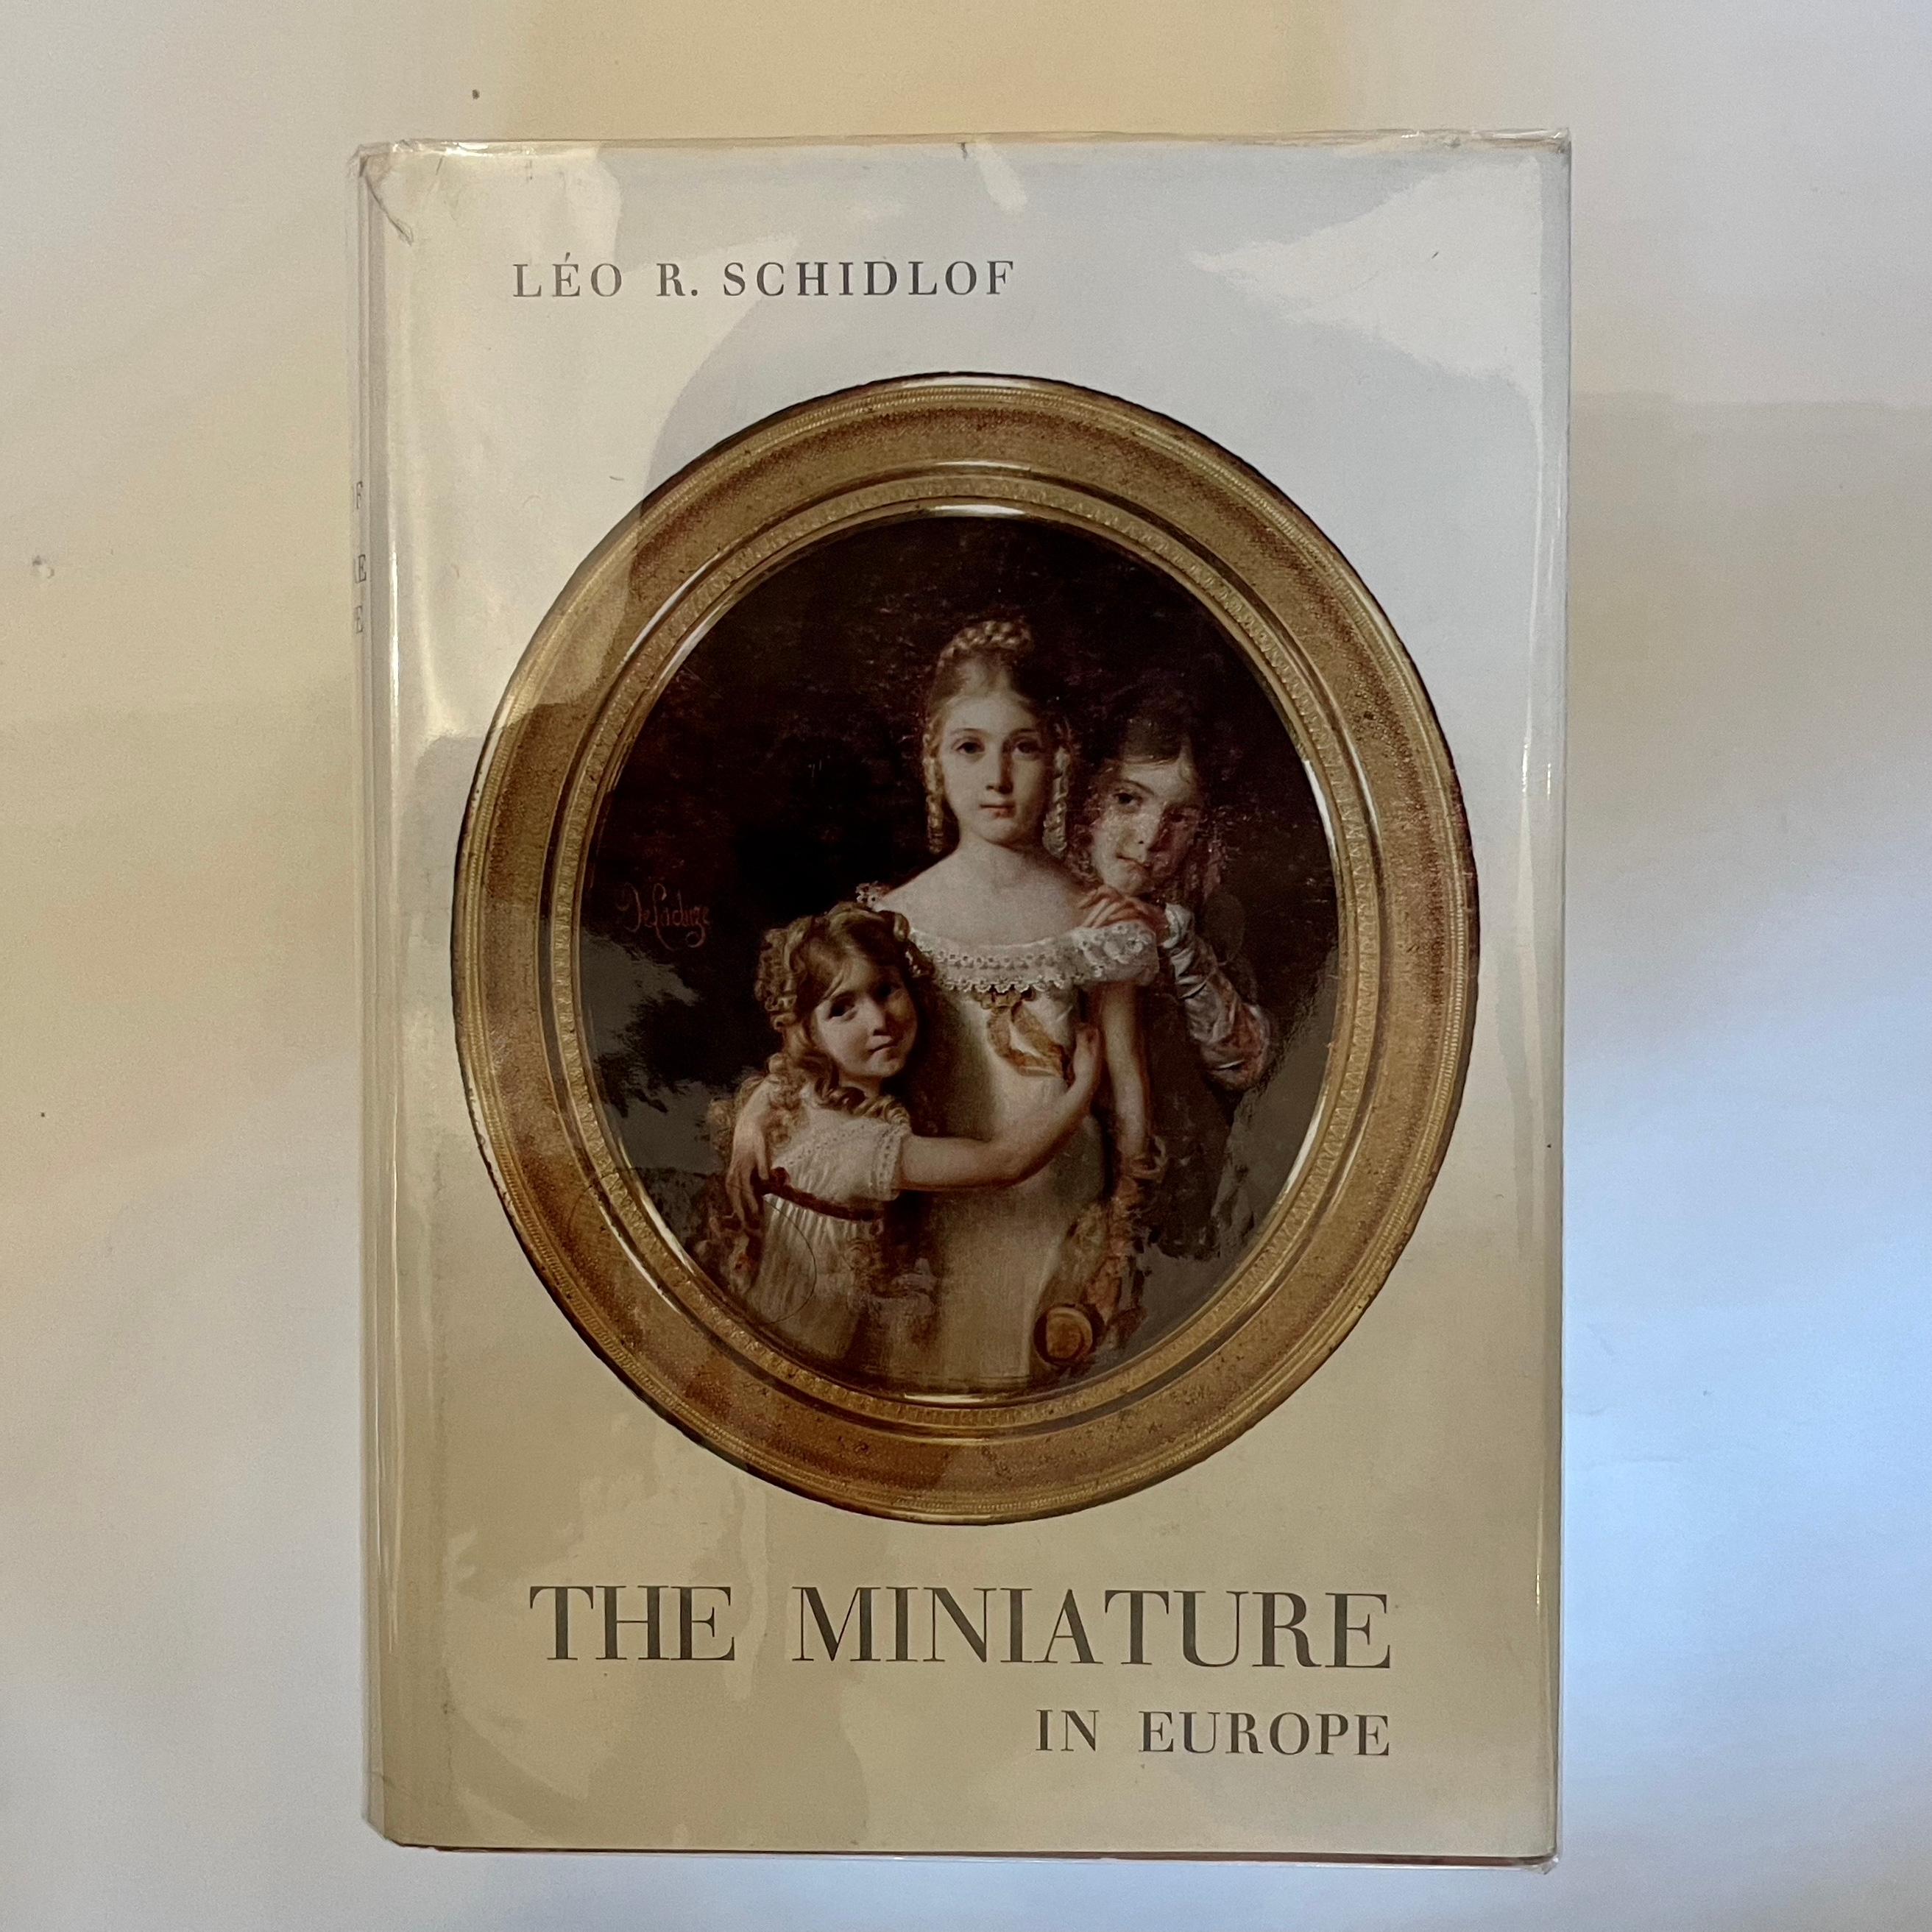 First English Edition, limited to 1000 numbered copies published in 4 volumes by Akademische Druck - und Verlagsanstalt, Graz, 1964.

Across the four volumes of this comprehensive work on miniature painting in Europe in the 16th, 17th, 18th and 19th